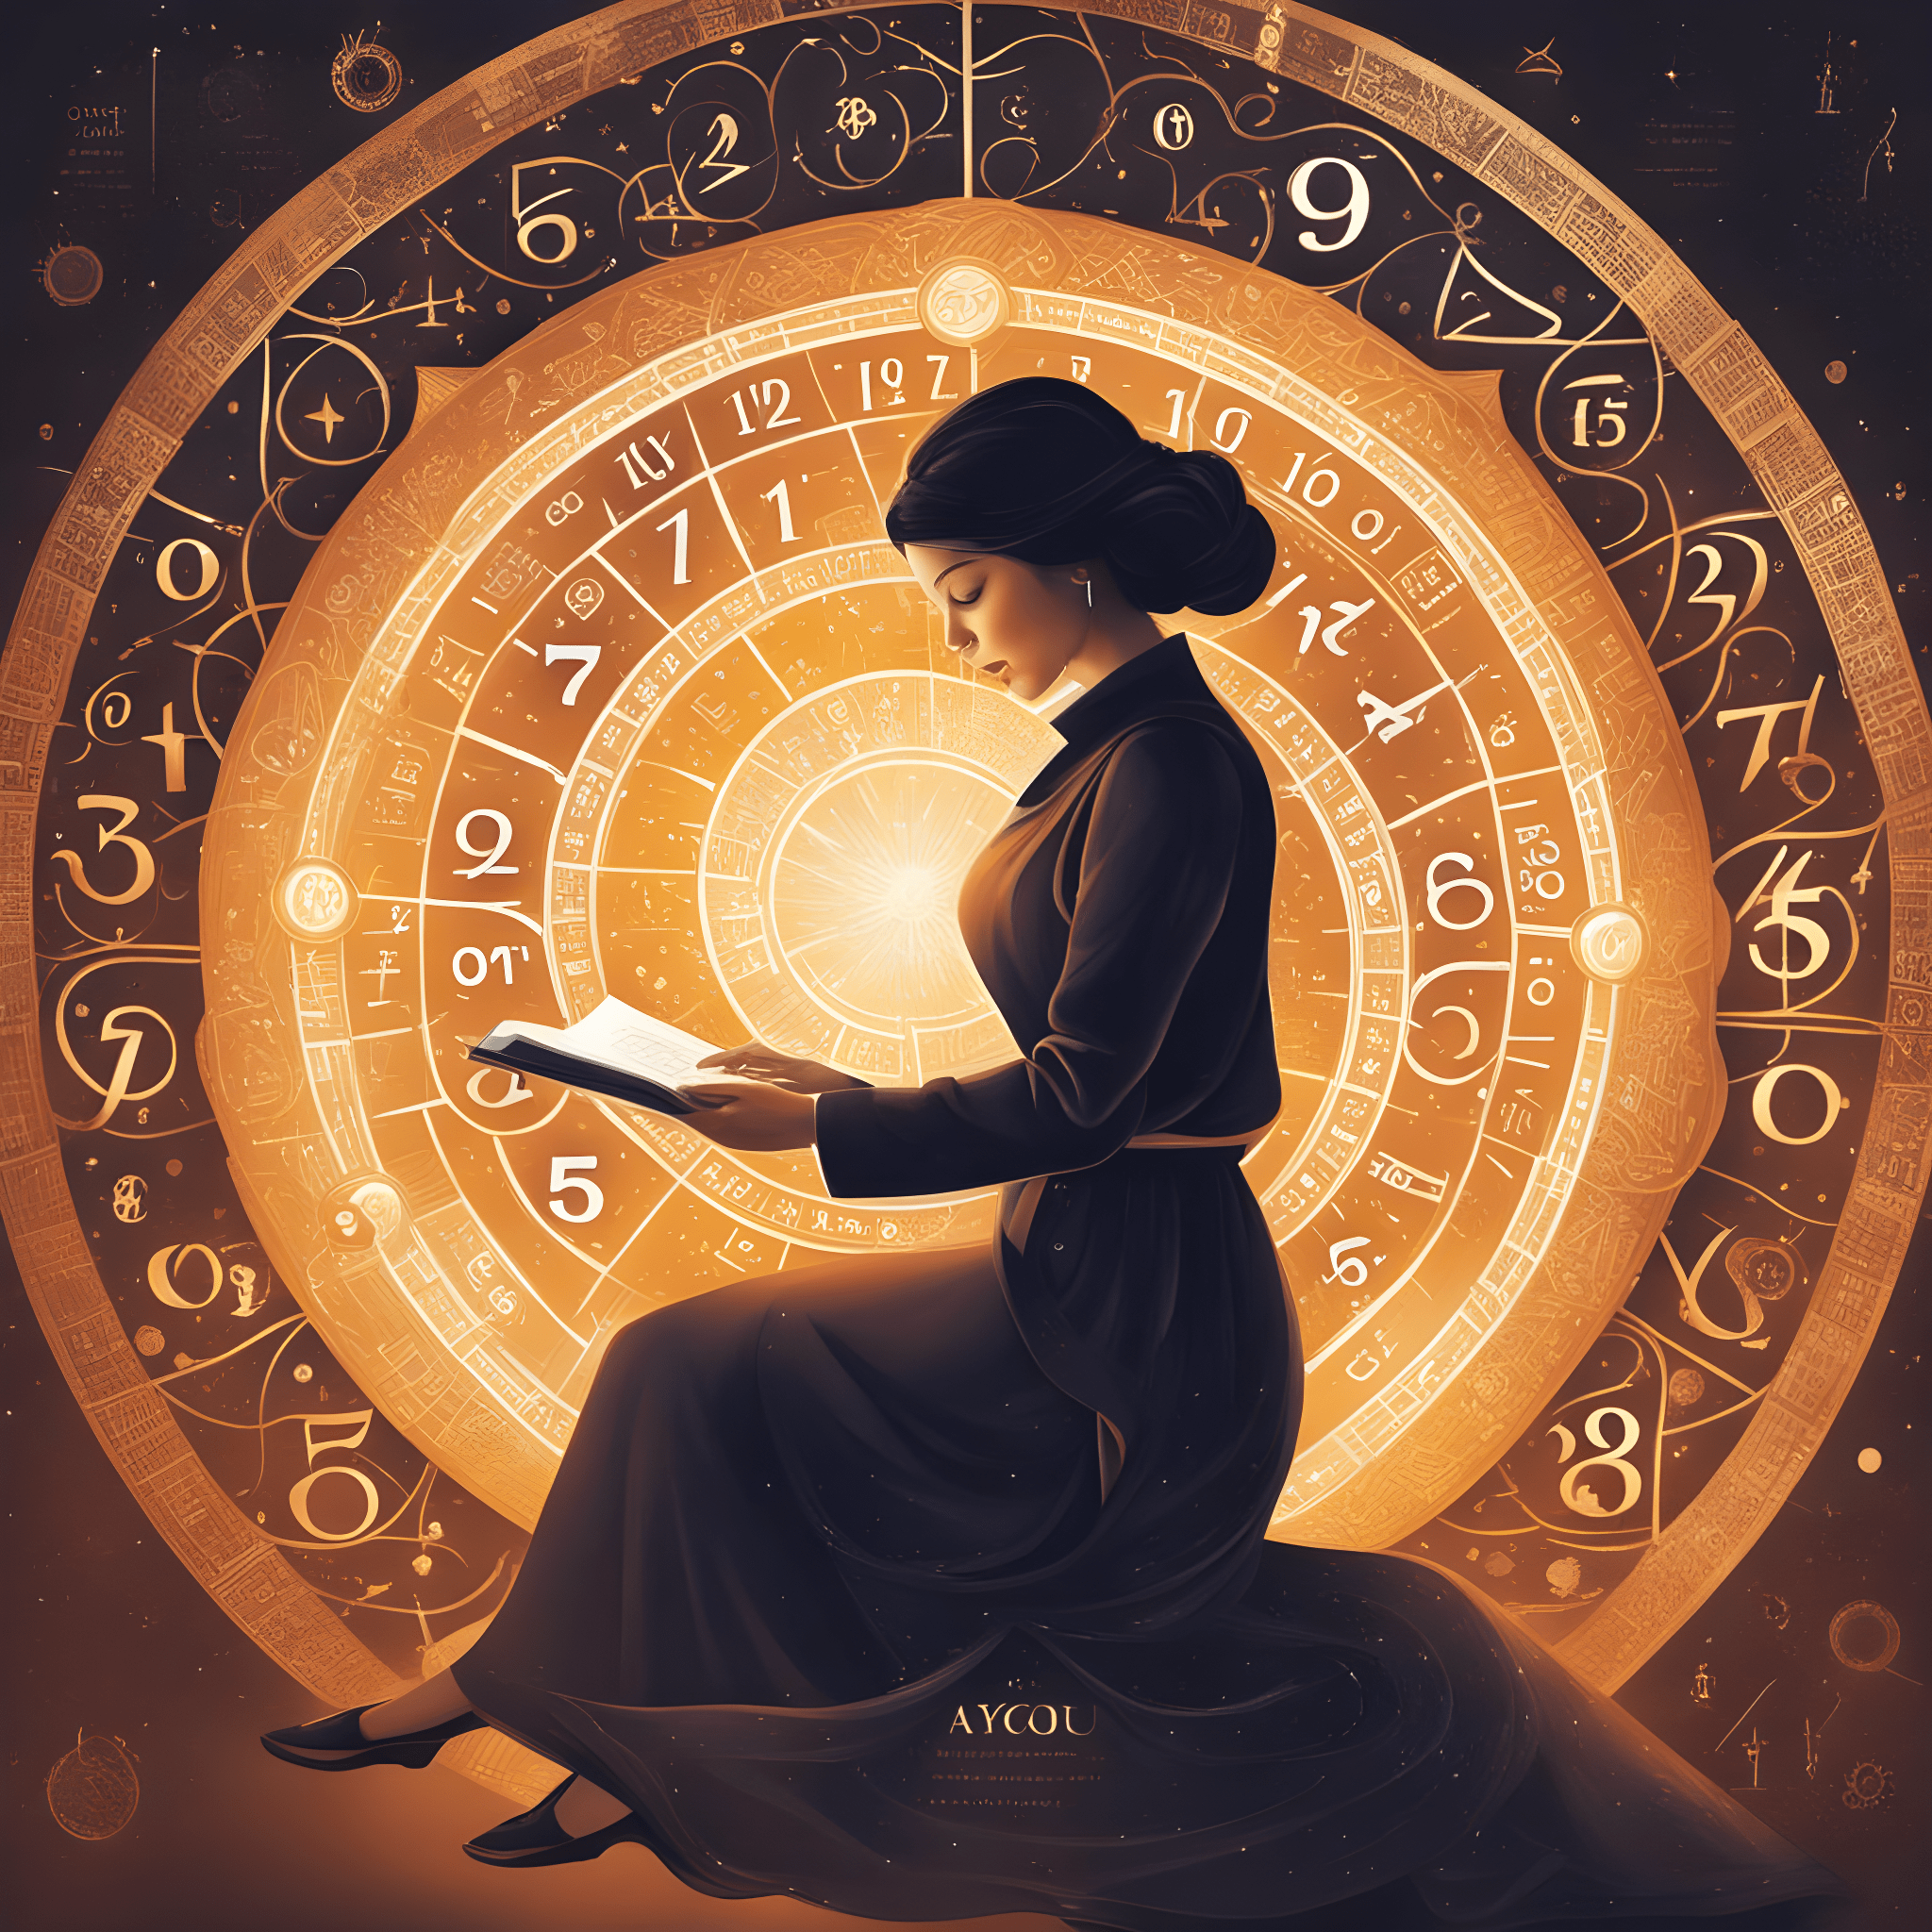 A visually captivating image introducing the concept of Numerology, featuring a knowledgeable woman practitioner at work, surrounded by numbers and symbols.